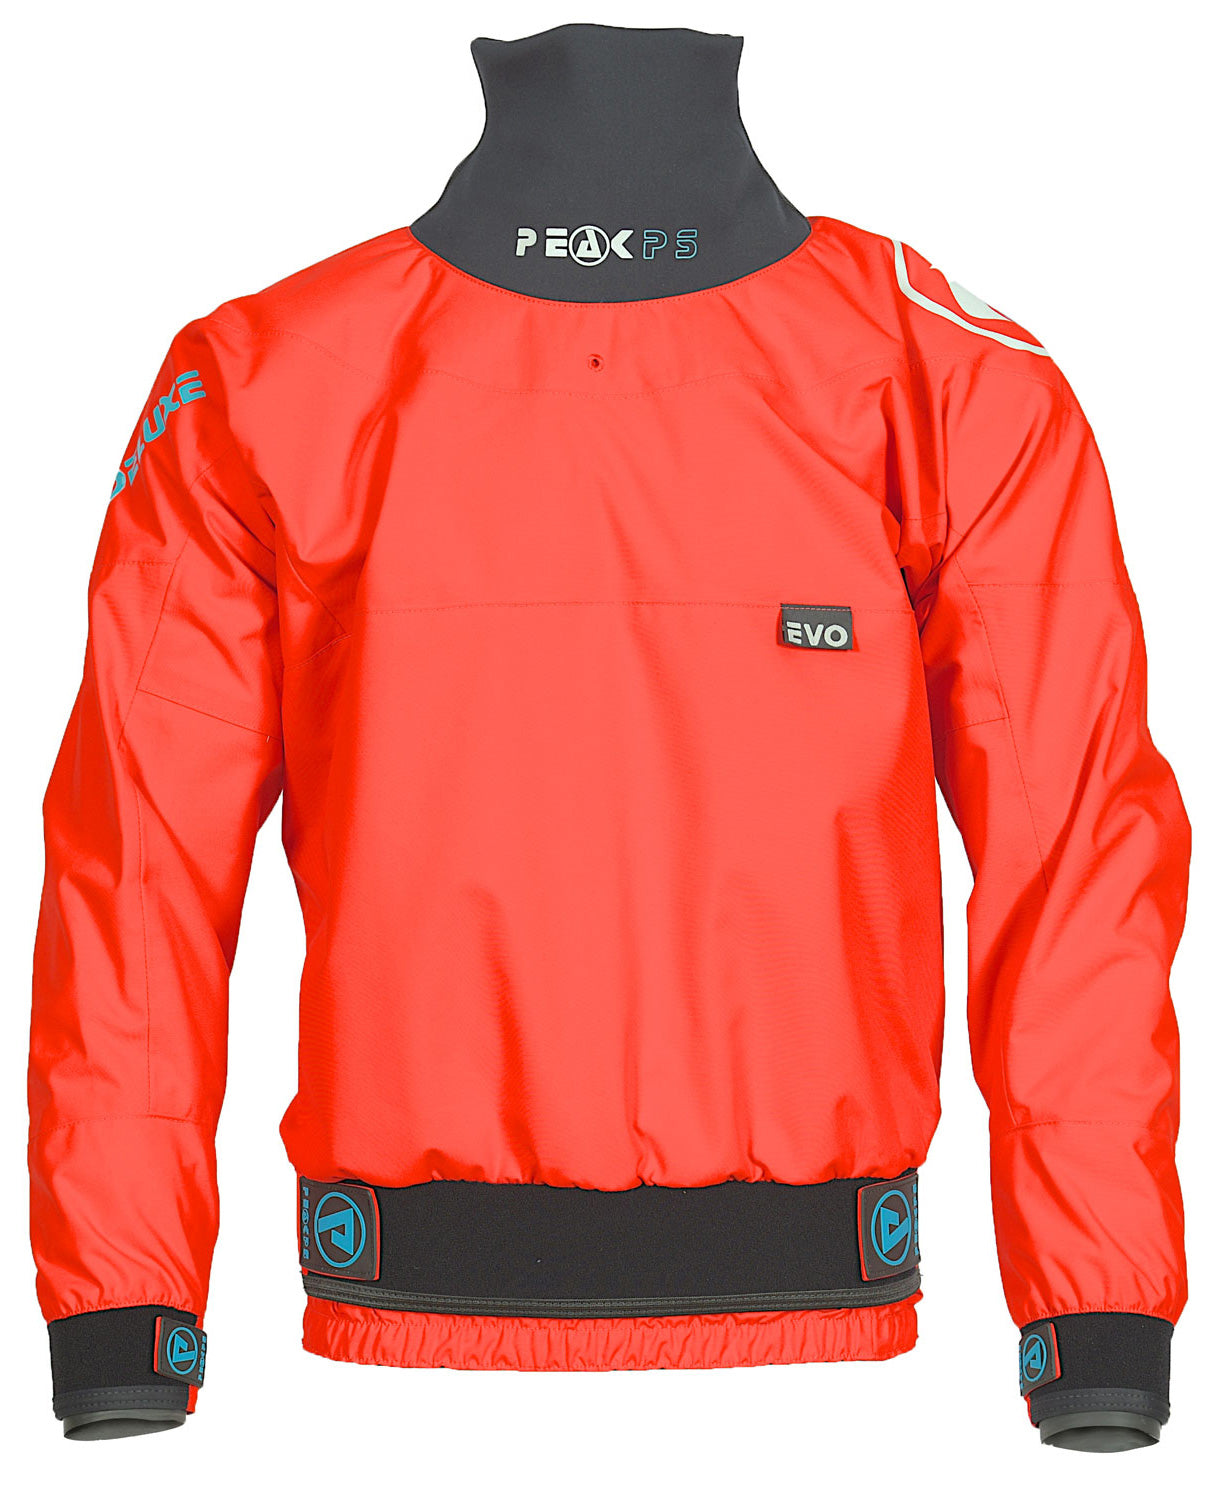 Fropnt view of a red Peak Paddlesports deluxe 2.5l Evo Whitewater use paddling jacket